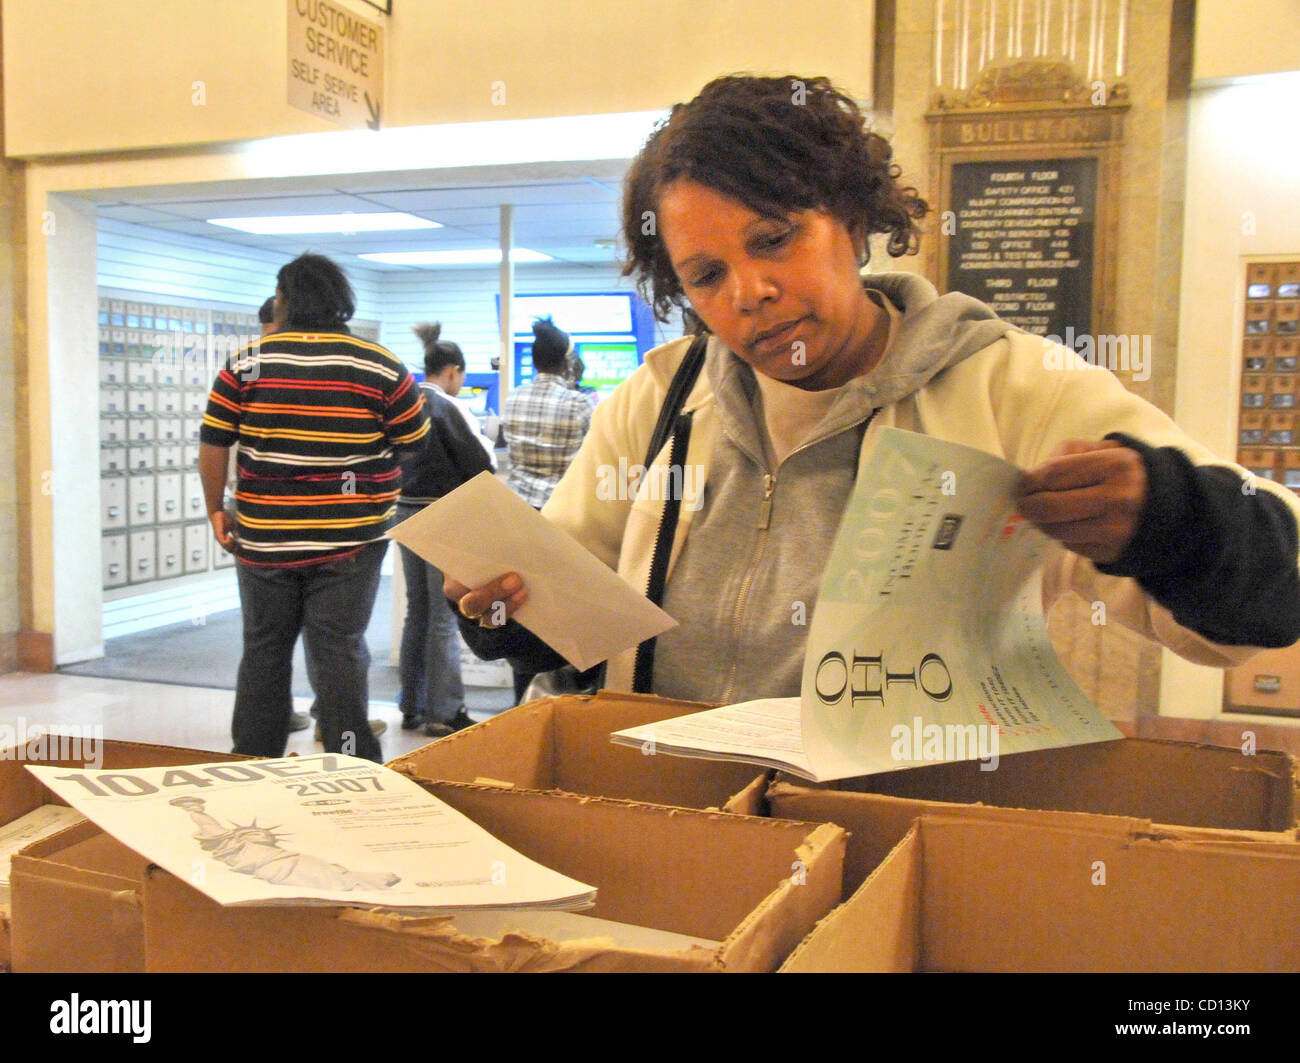 Apr 15, 2008 - Cincinnati, Ohio, USA - Some taxpayers waited to the very last minute to do their taxes. This woman had barely over an hour to complete her tax return as she was reading it inside the post office at the main postal facility in downtown Cincinnati. Unlike previous years, this was the o Stock Photo